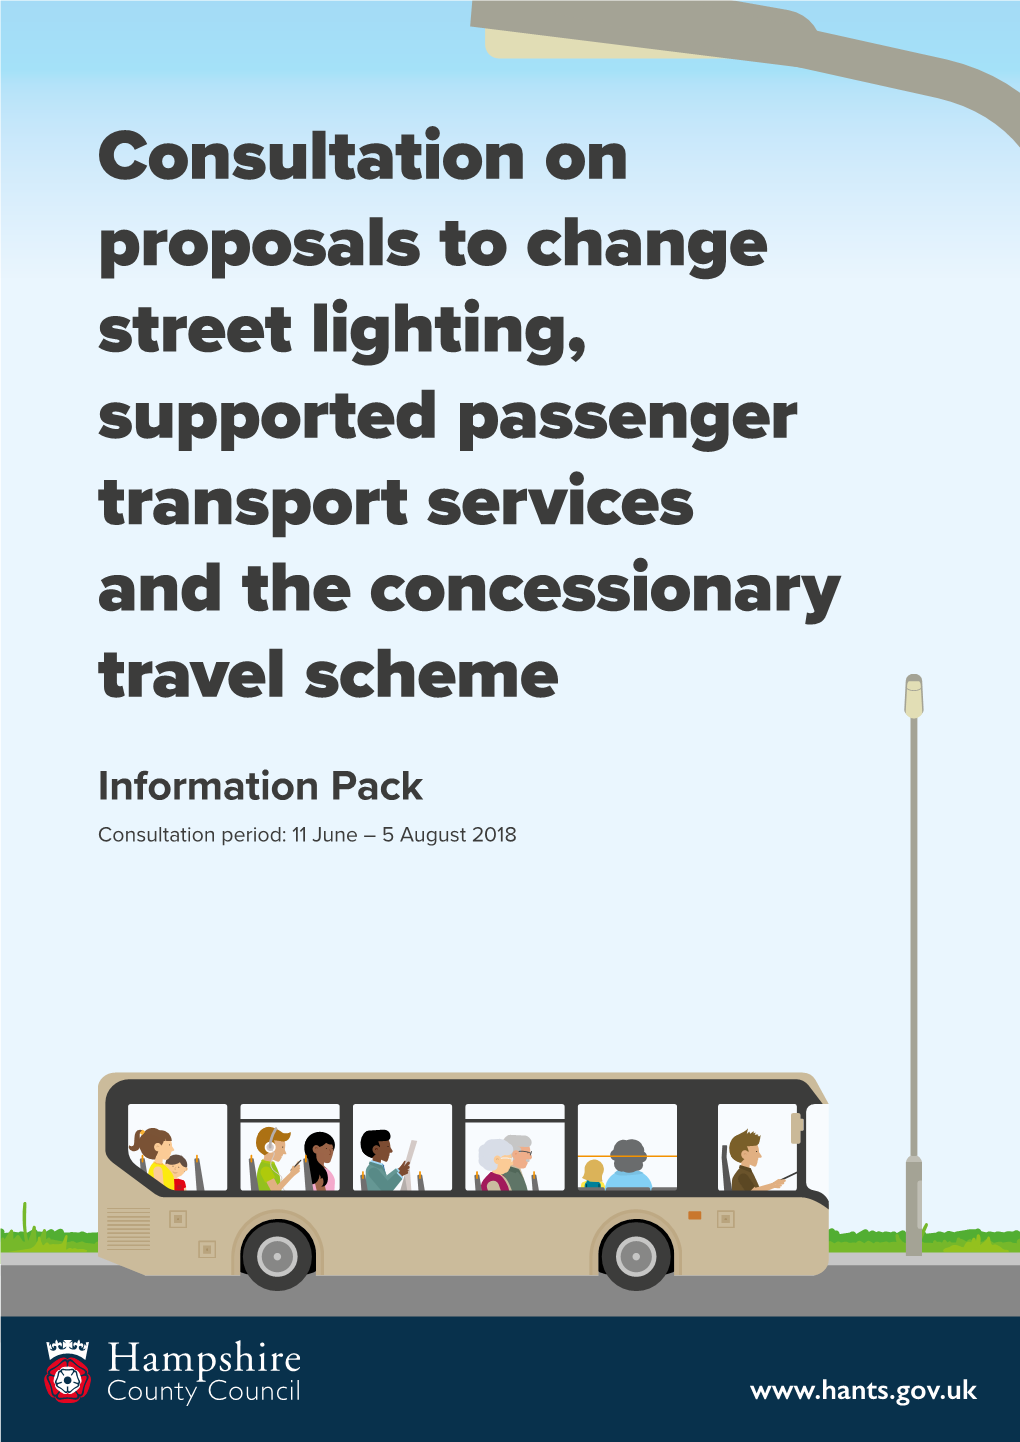 Consultation on Proposals to Change Street Lighting, Supported Passenger Transport Services and the Concessionary Travel Scheme